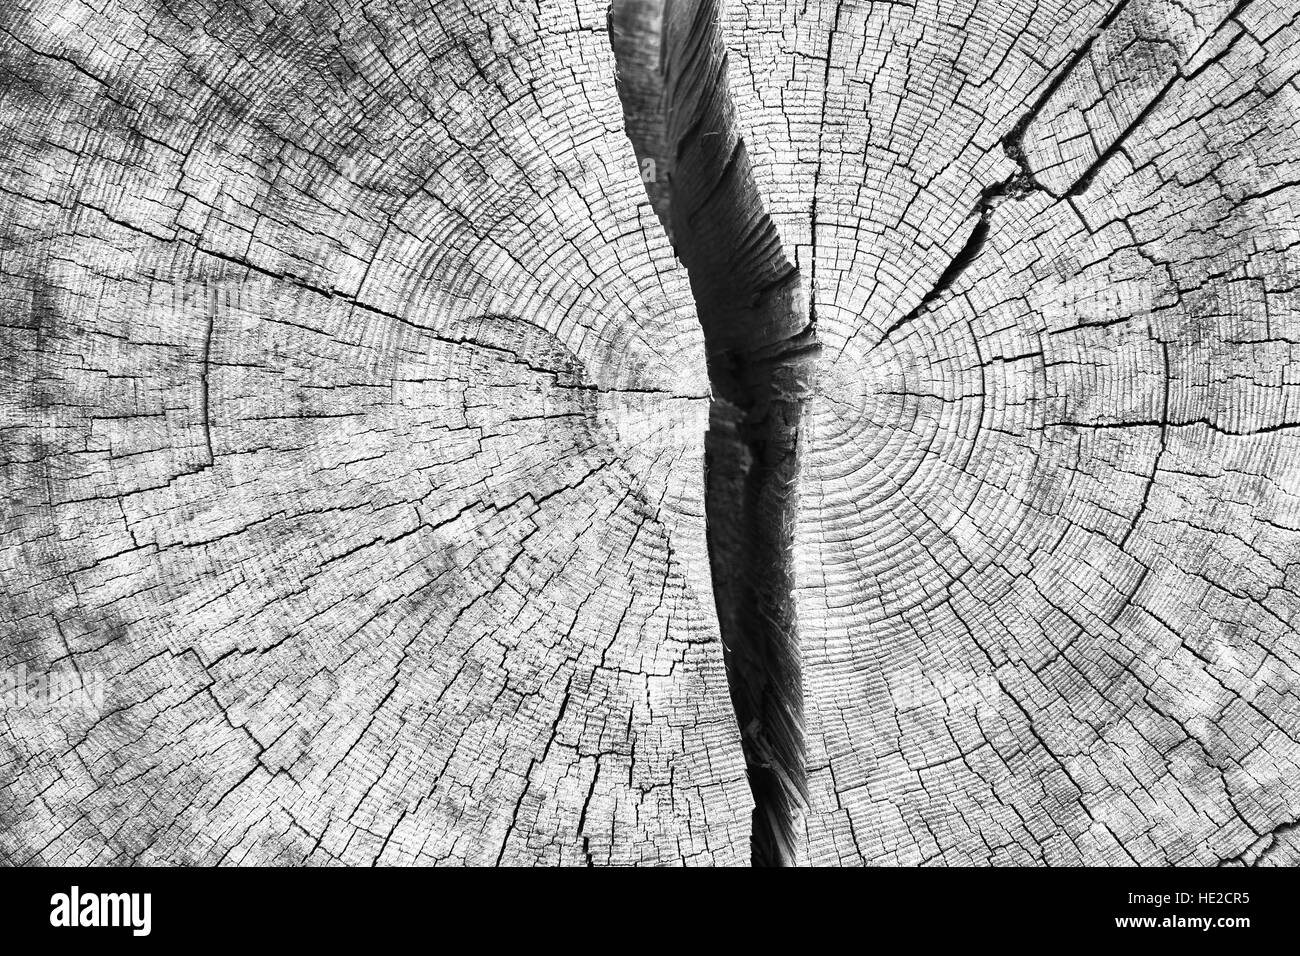 Cross-sectional view of cracked log wood texture Stock Photo